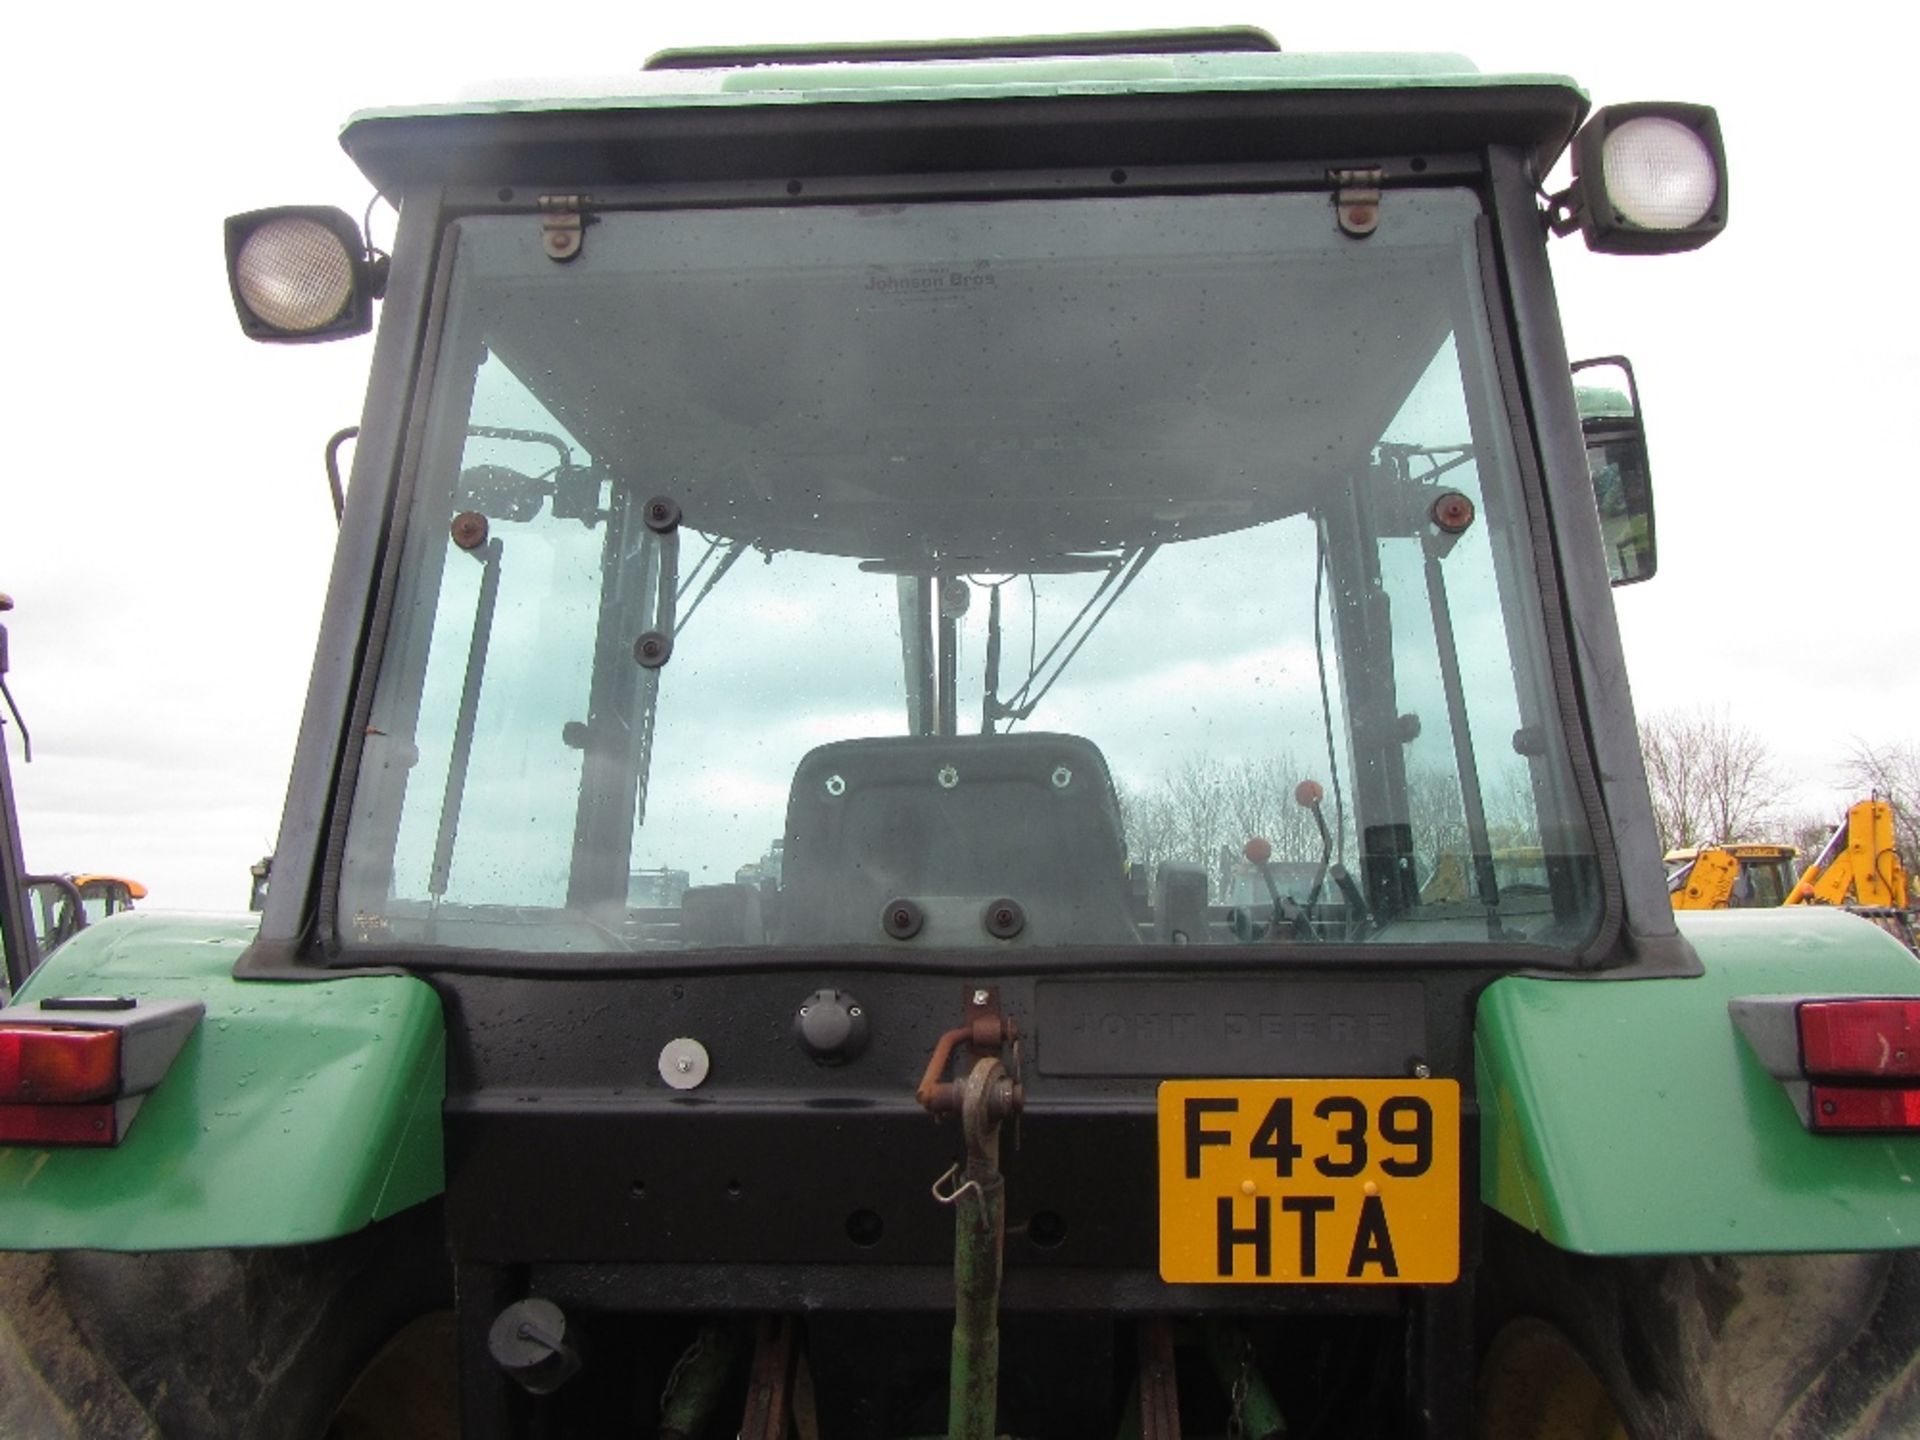 John Deere 3050 2wd Tractor. c/w V5. One owner from new Reg. No. F439 HTA - Image 8 of 12